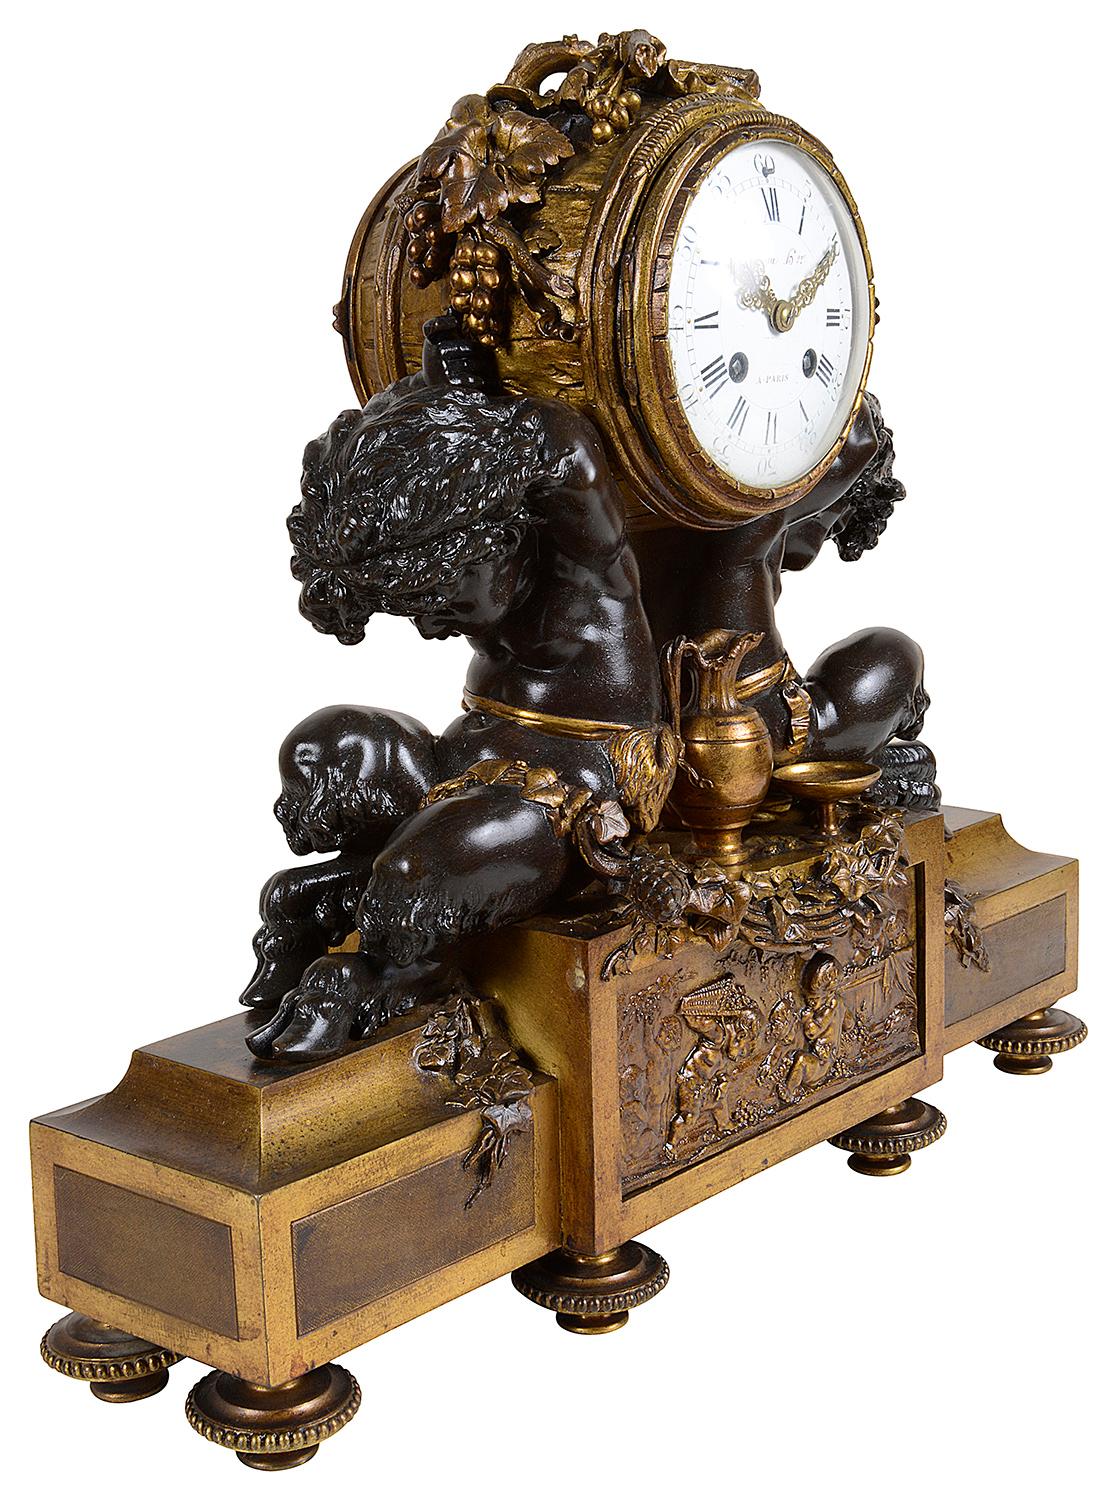 A very good quality 19th century French gilded ormolu and bronze Louis XVI style mantel (fireplace) clock, have cloven hoofed putti supporting the clock, with Bacchus influenced decoration around and to the panel in the center. The white enameled